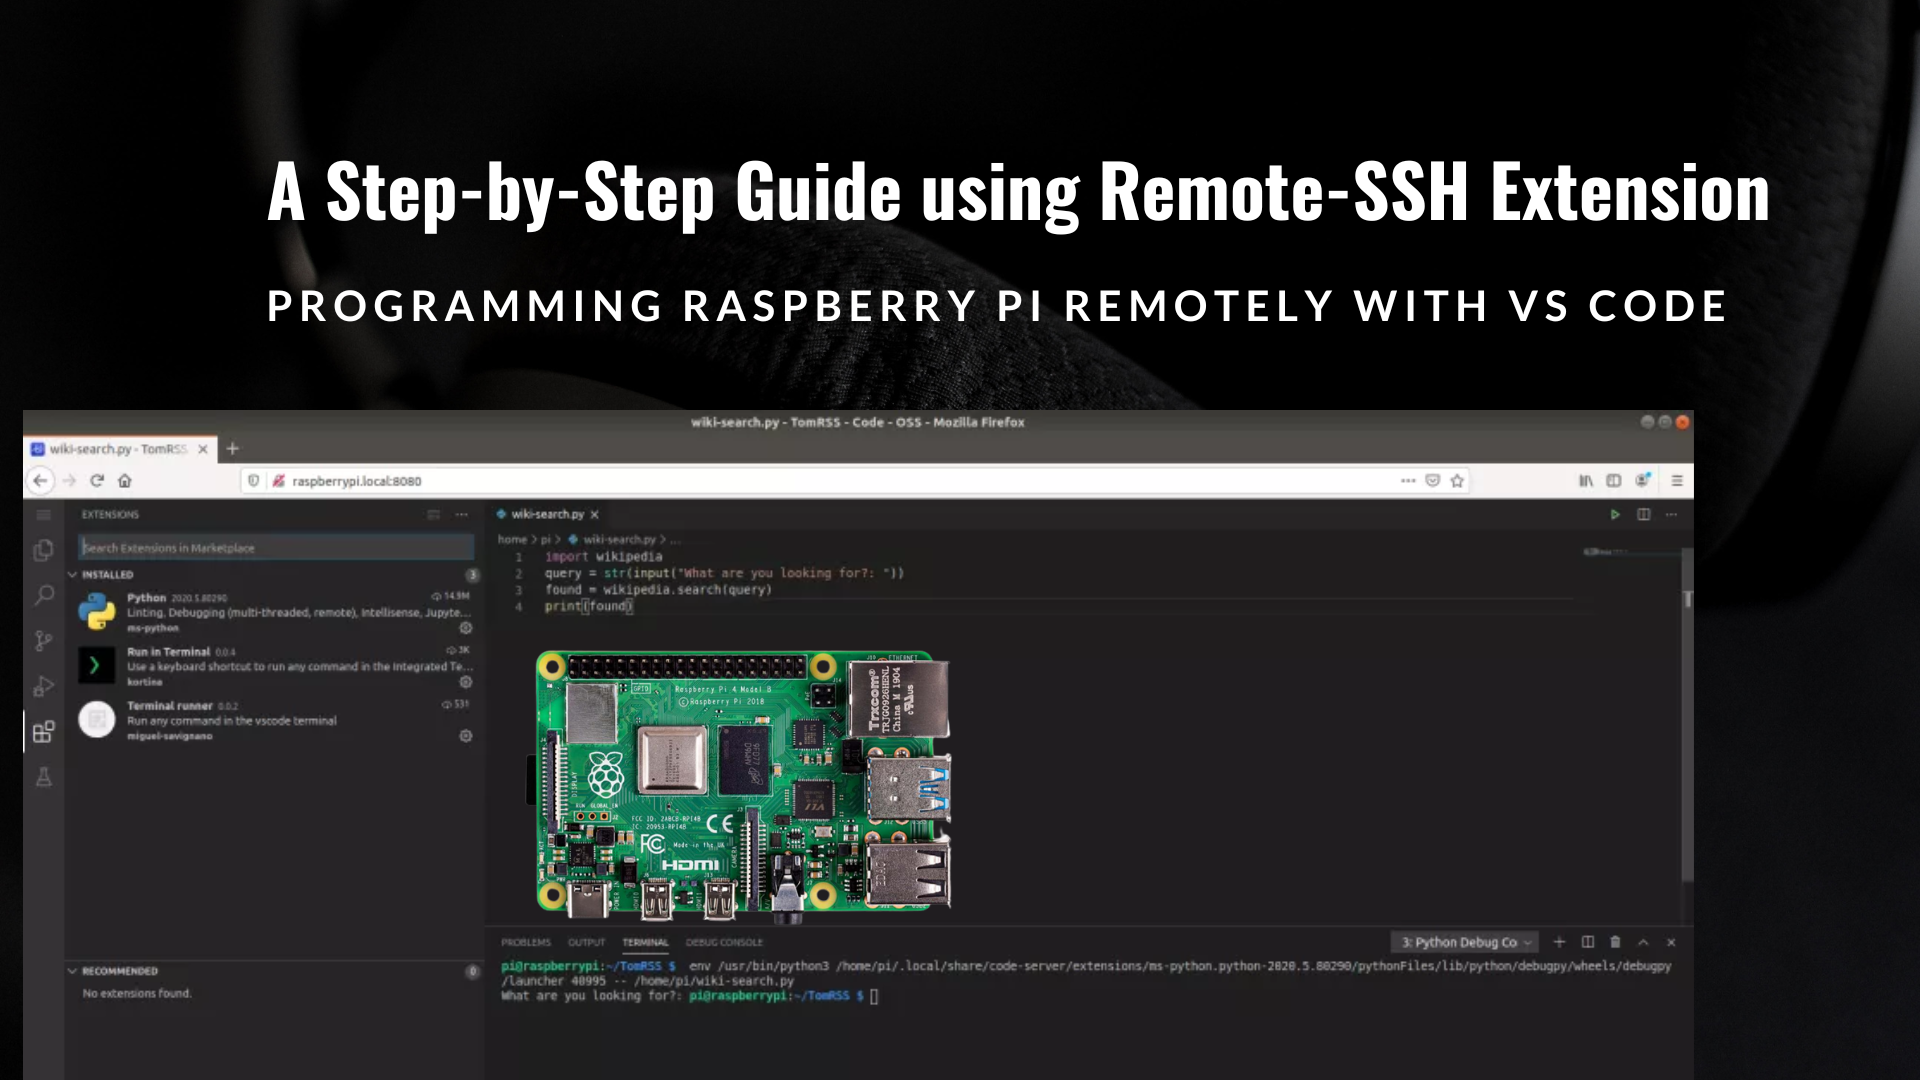 Programming Raspberry Pi Remotely with VS Code: A Step-by-Step Guide using Remote-SSH Extension